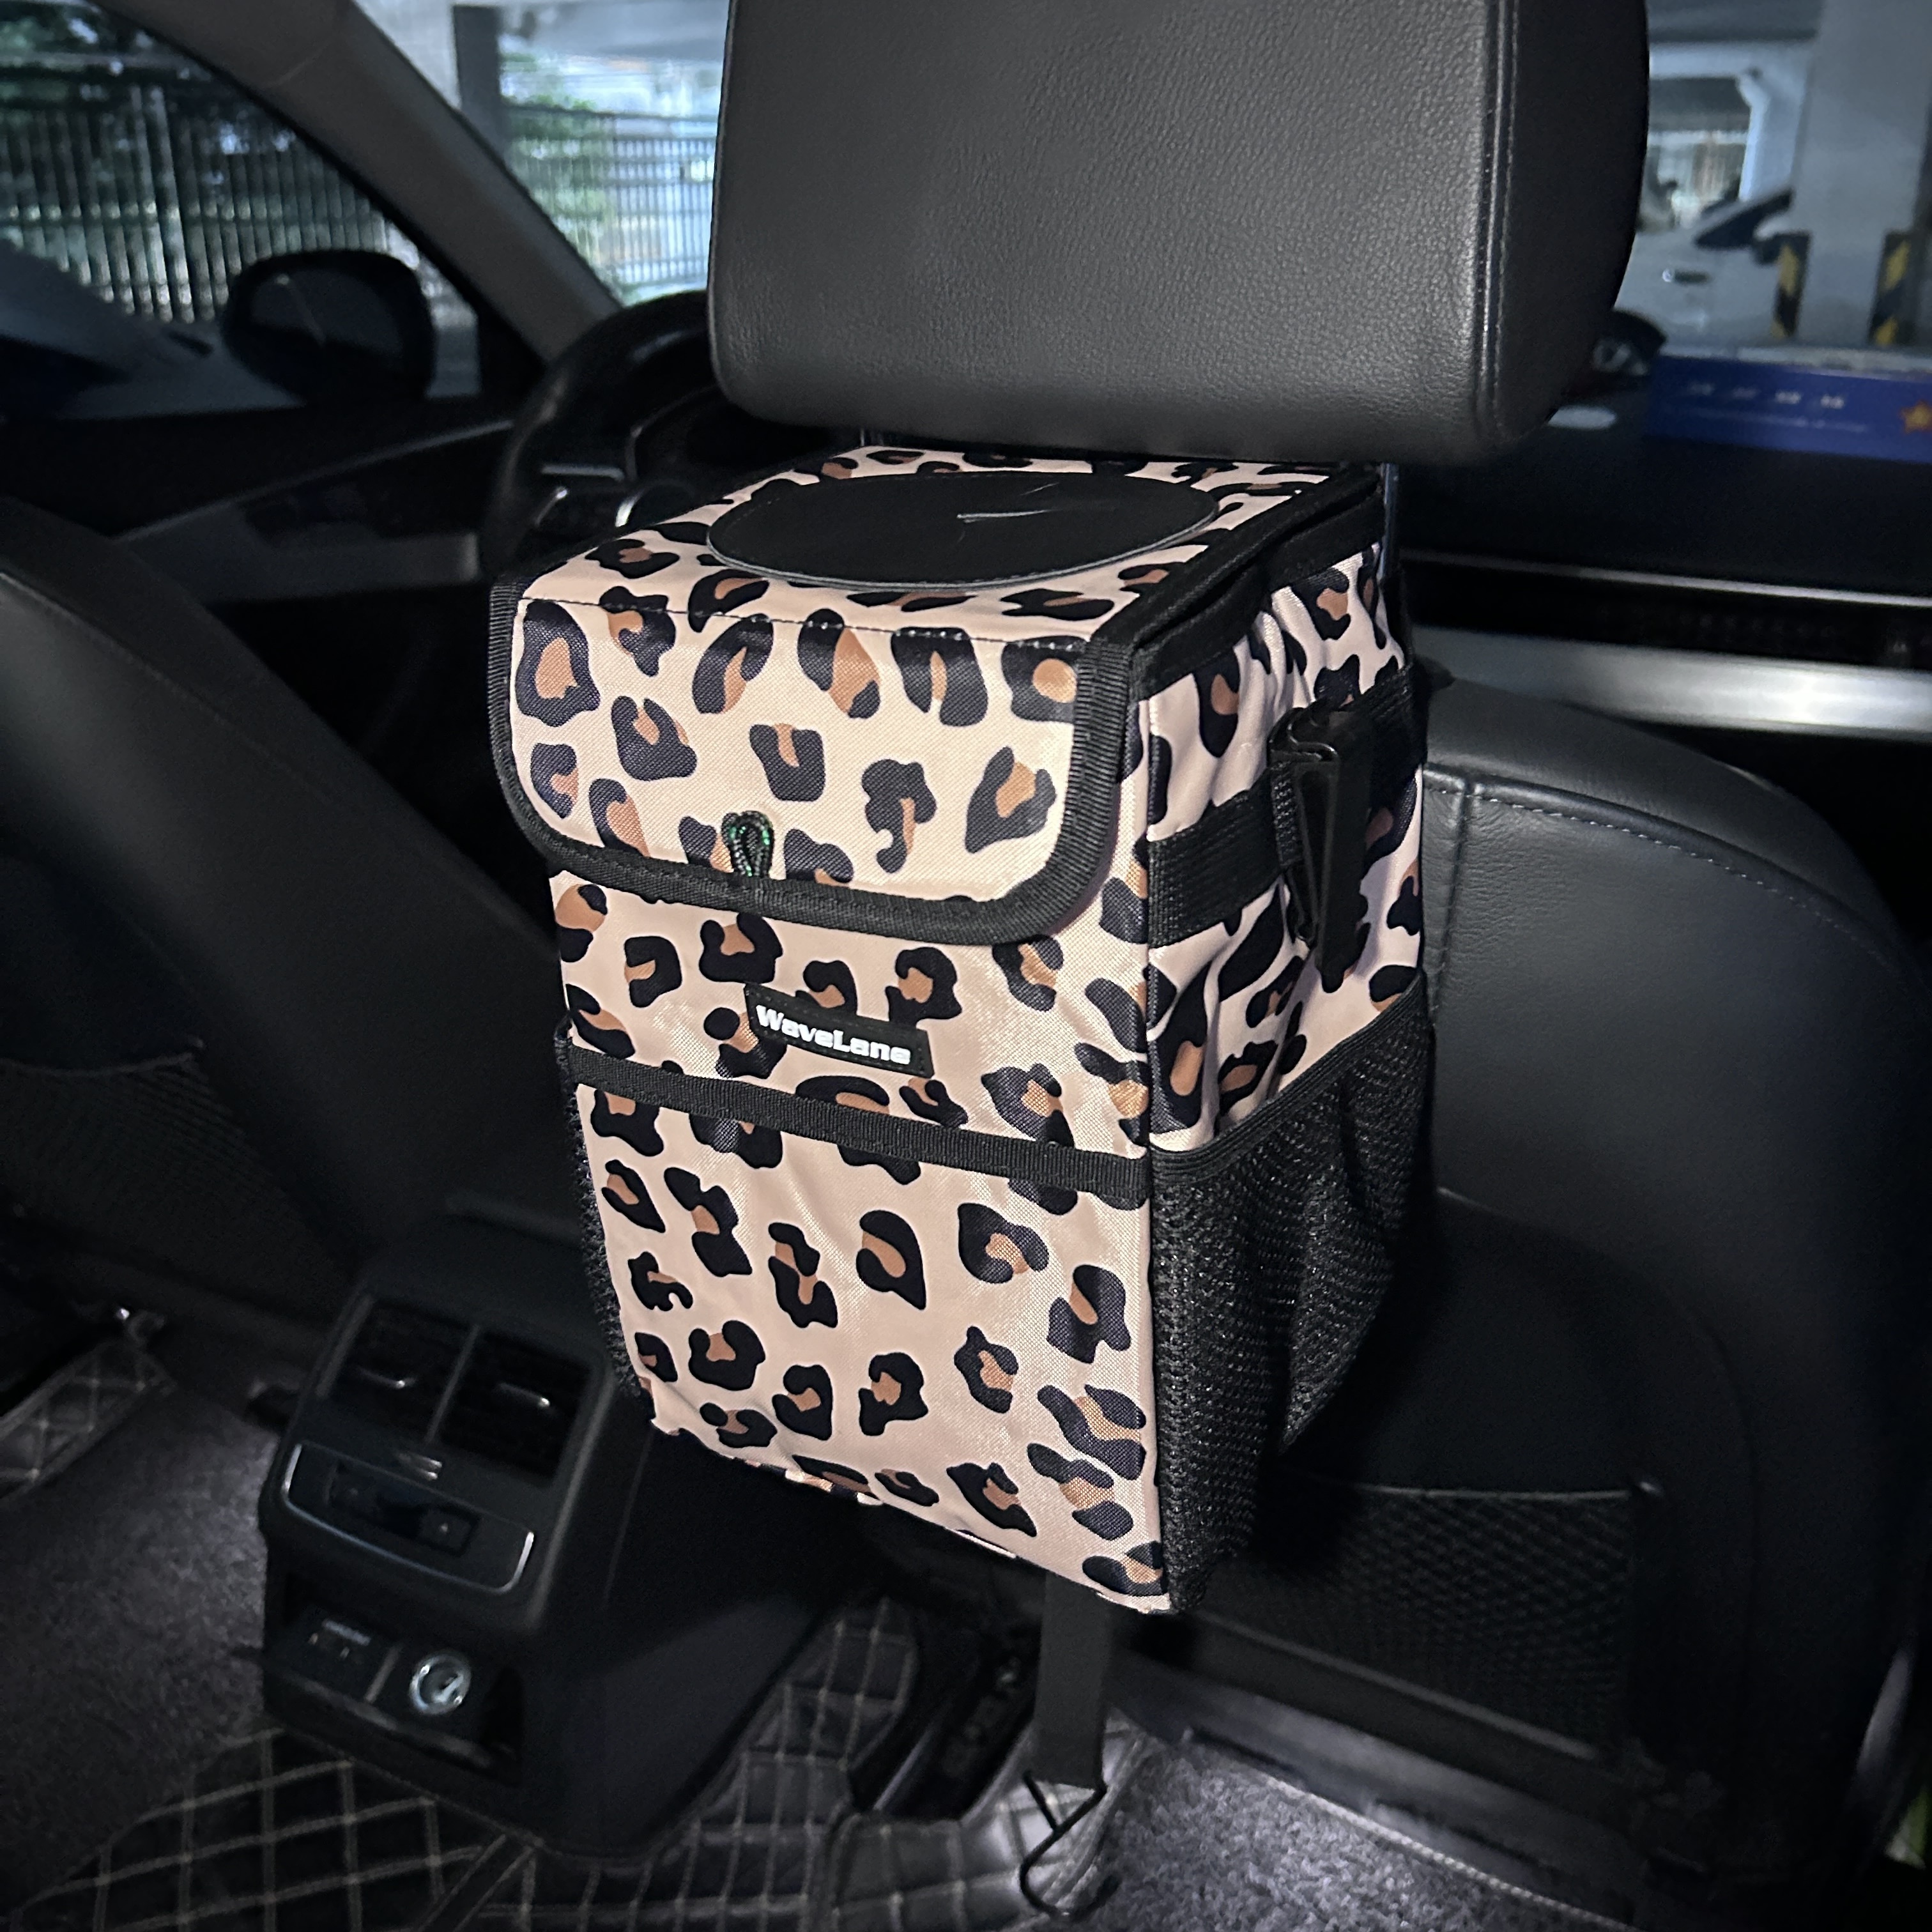 Car Seat Protector with Garbage Trash Can - Waterproof Car Seat